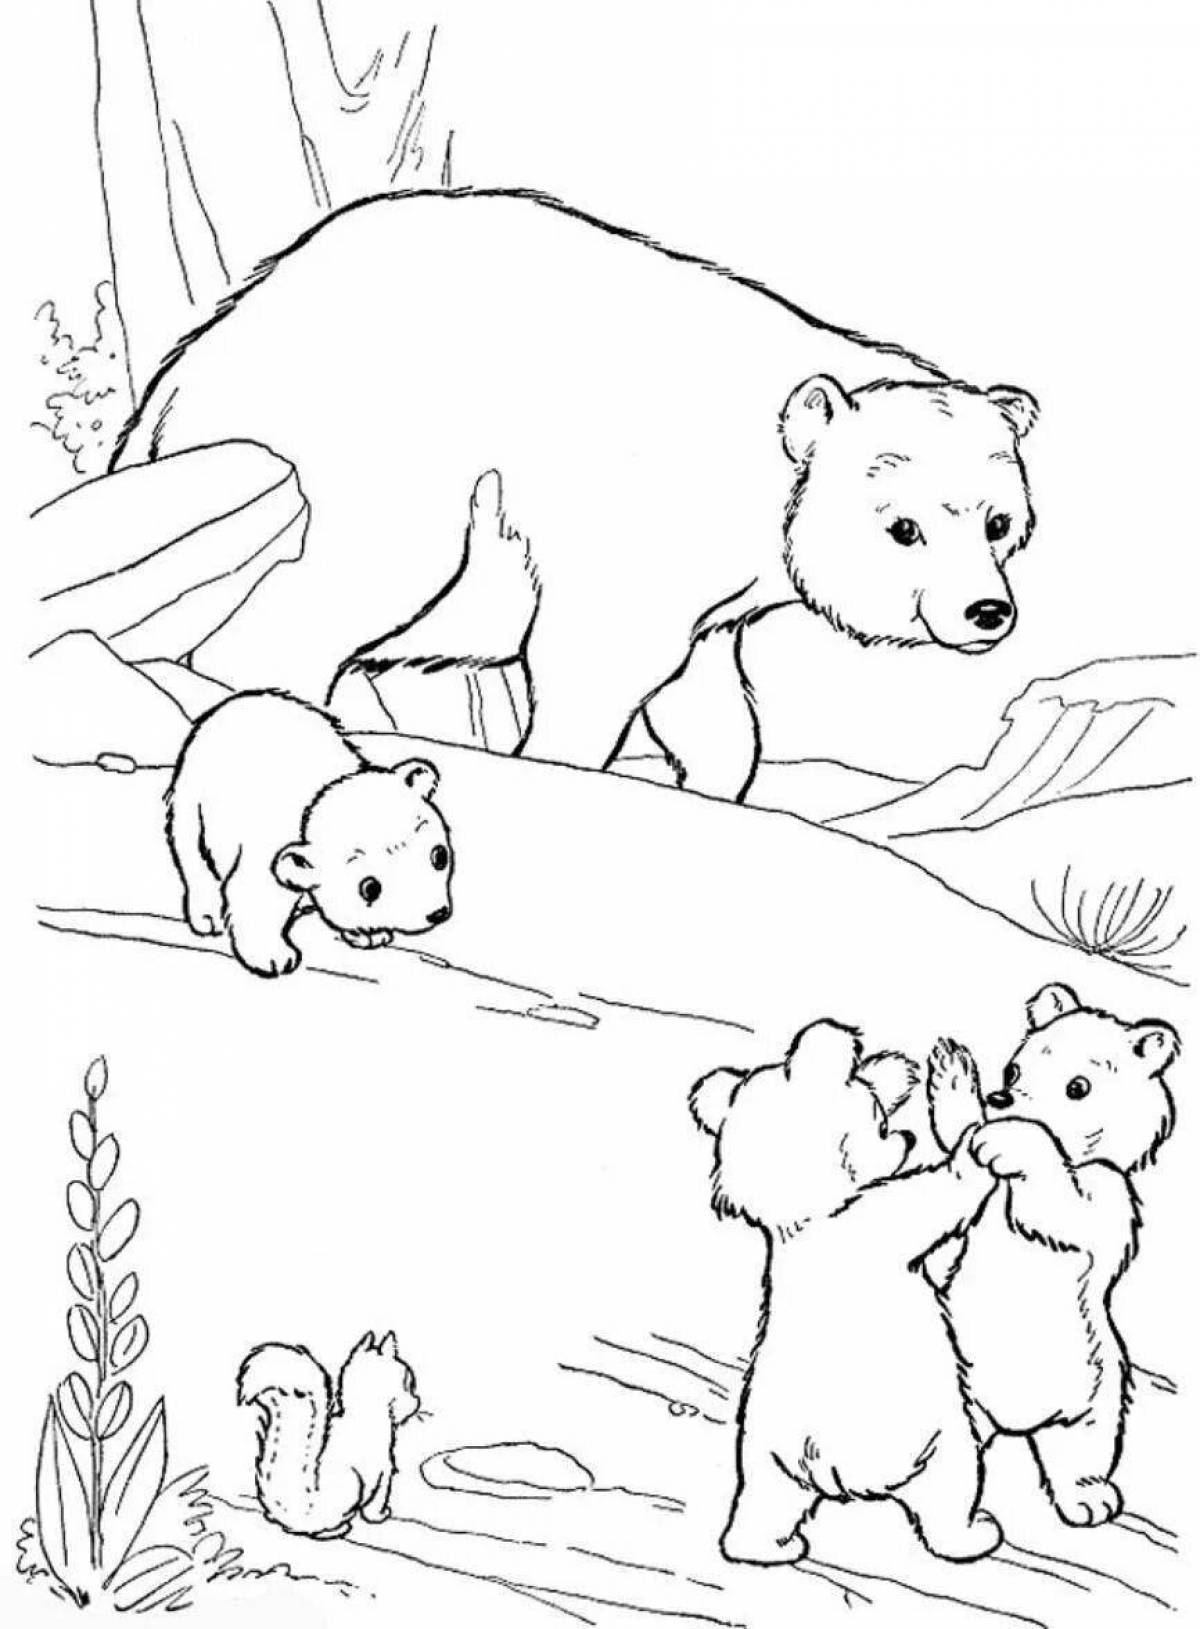 Relaxed bear in the forest coloring book